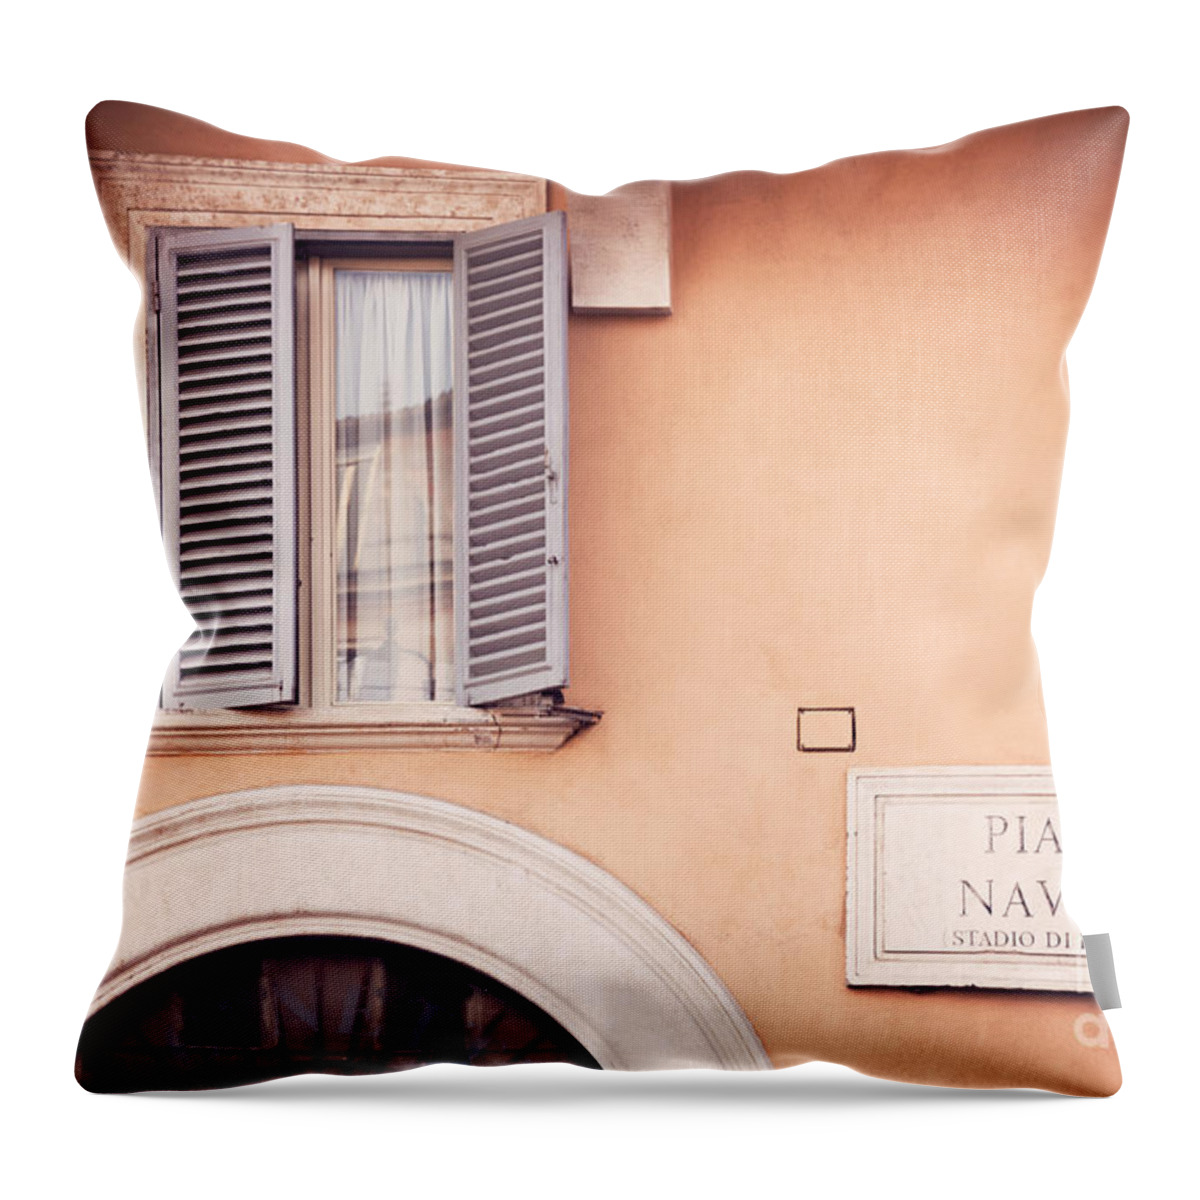 Piazza Throw Pillow featuring the photograph Piazza Navona by Matteo Colombo